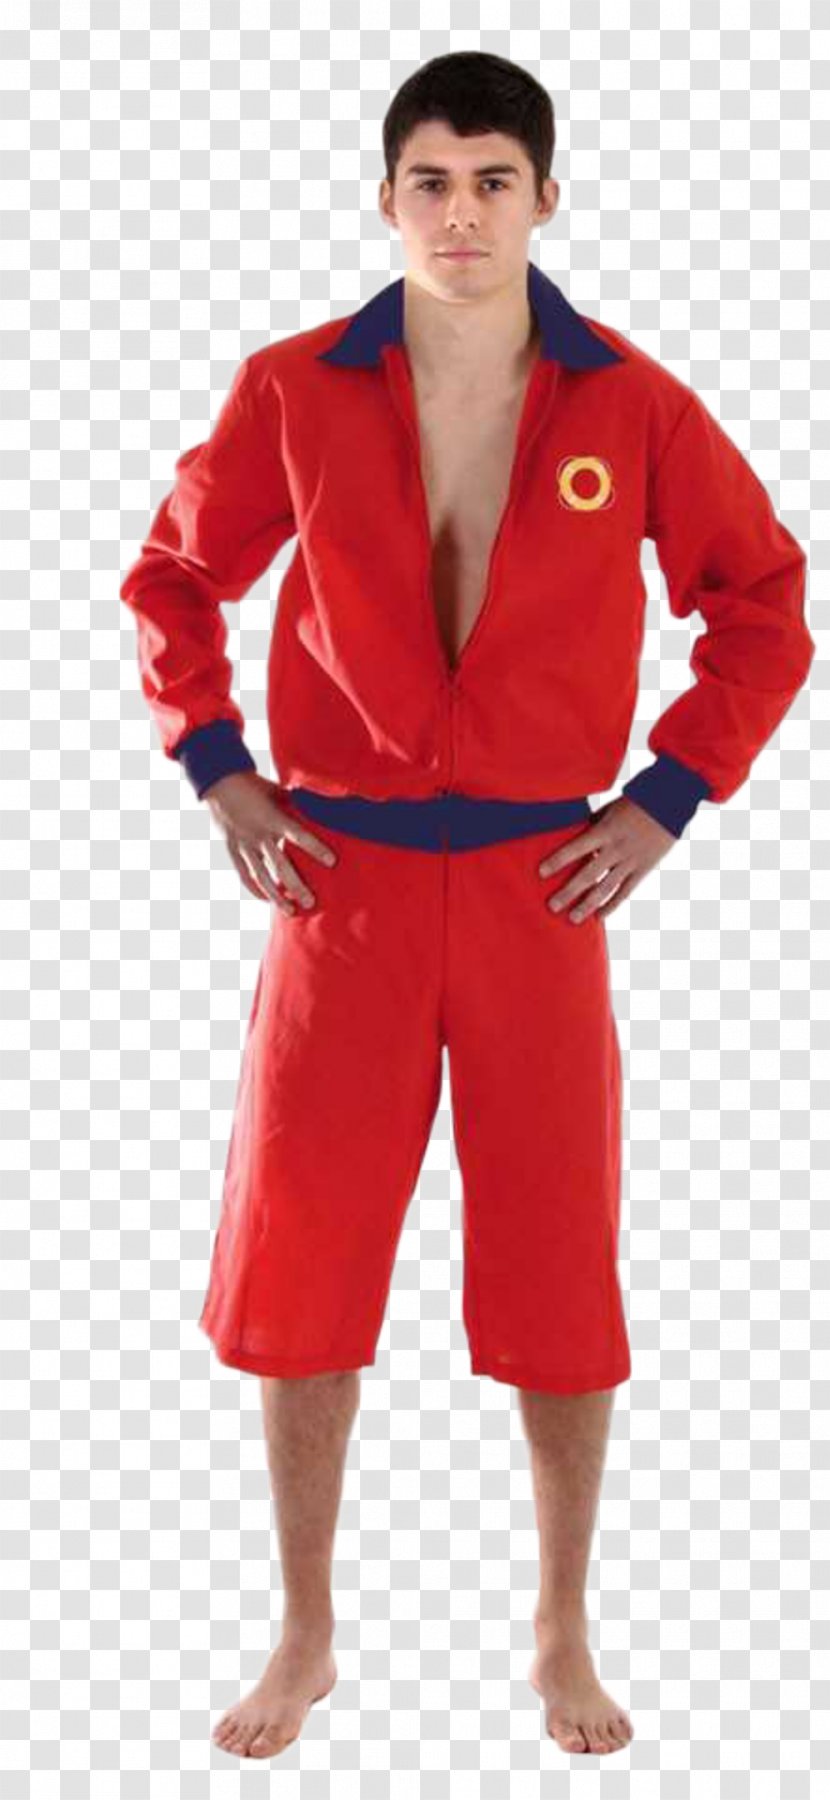 Robe Baywatch Costume Party Jacket - Shorts Transparent PNG